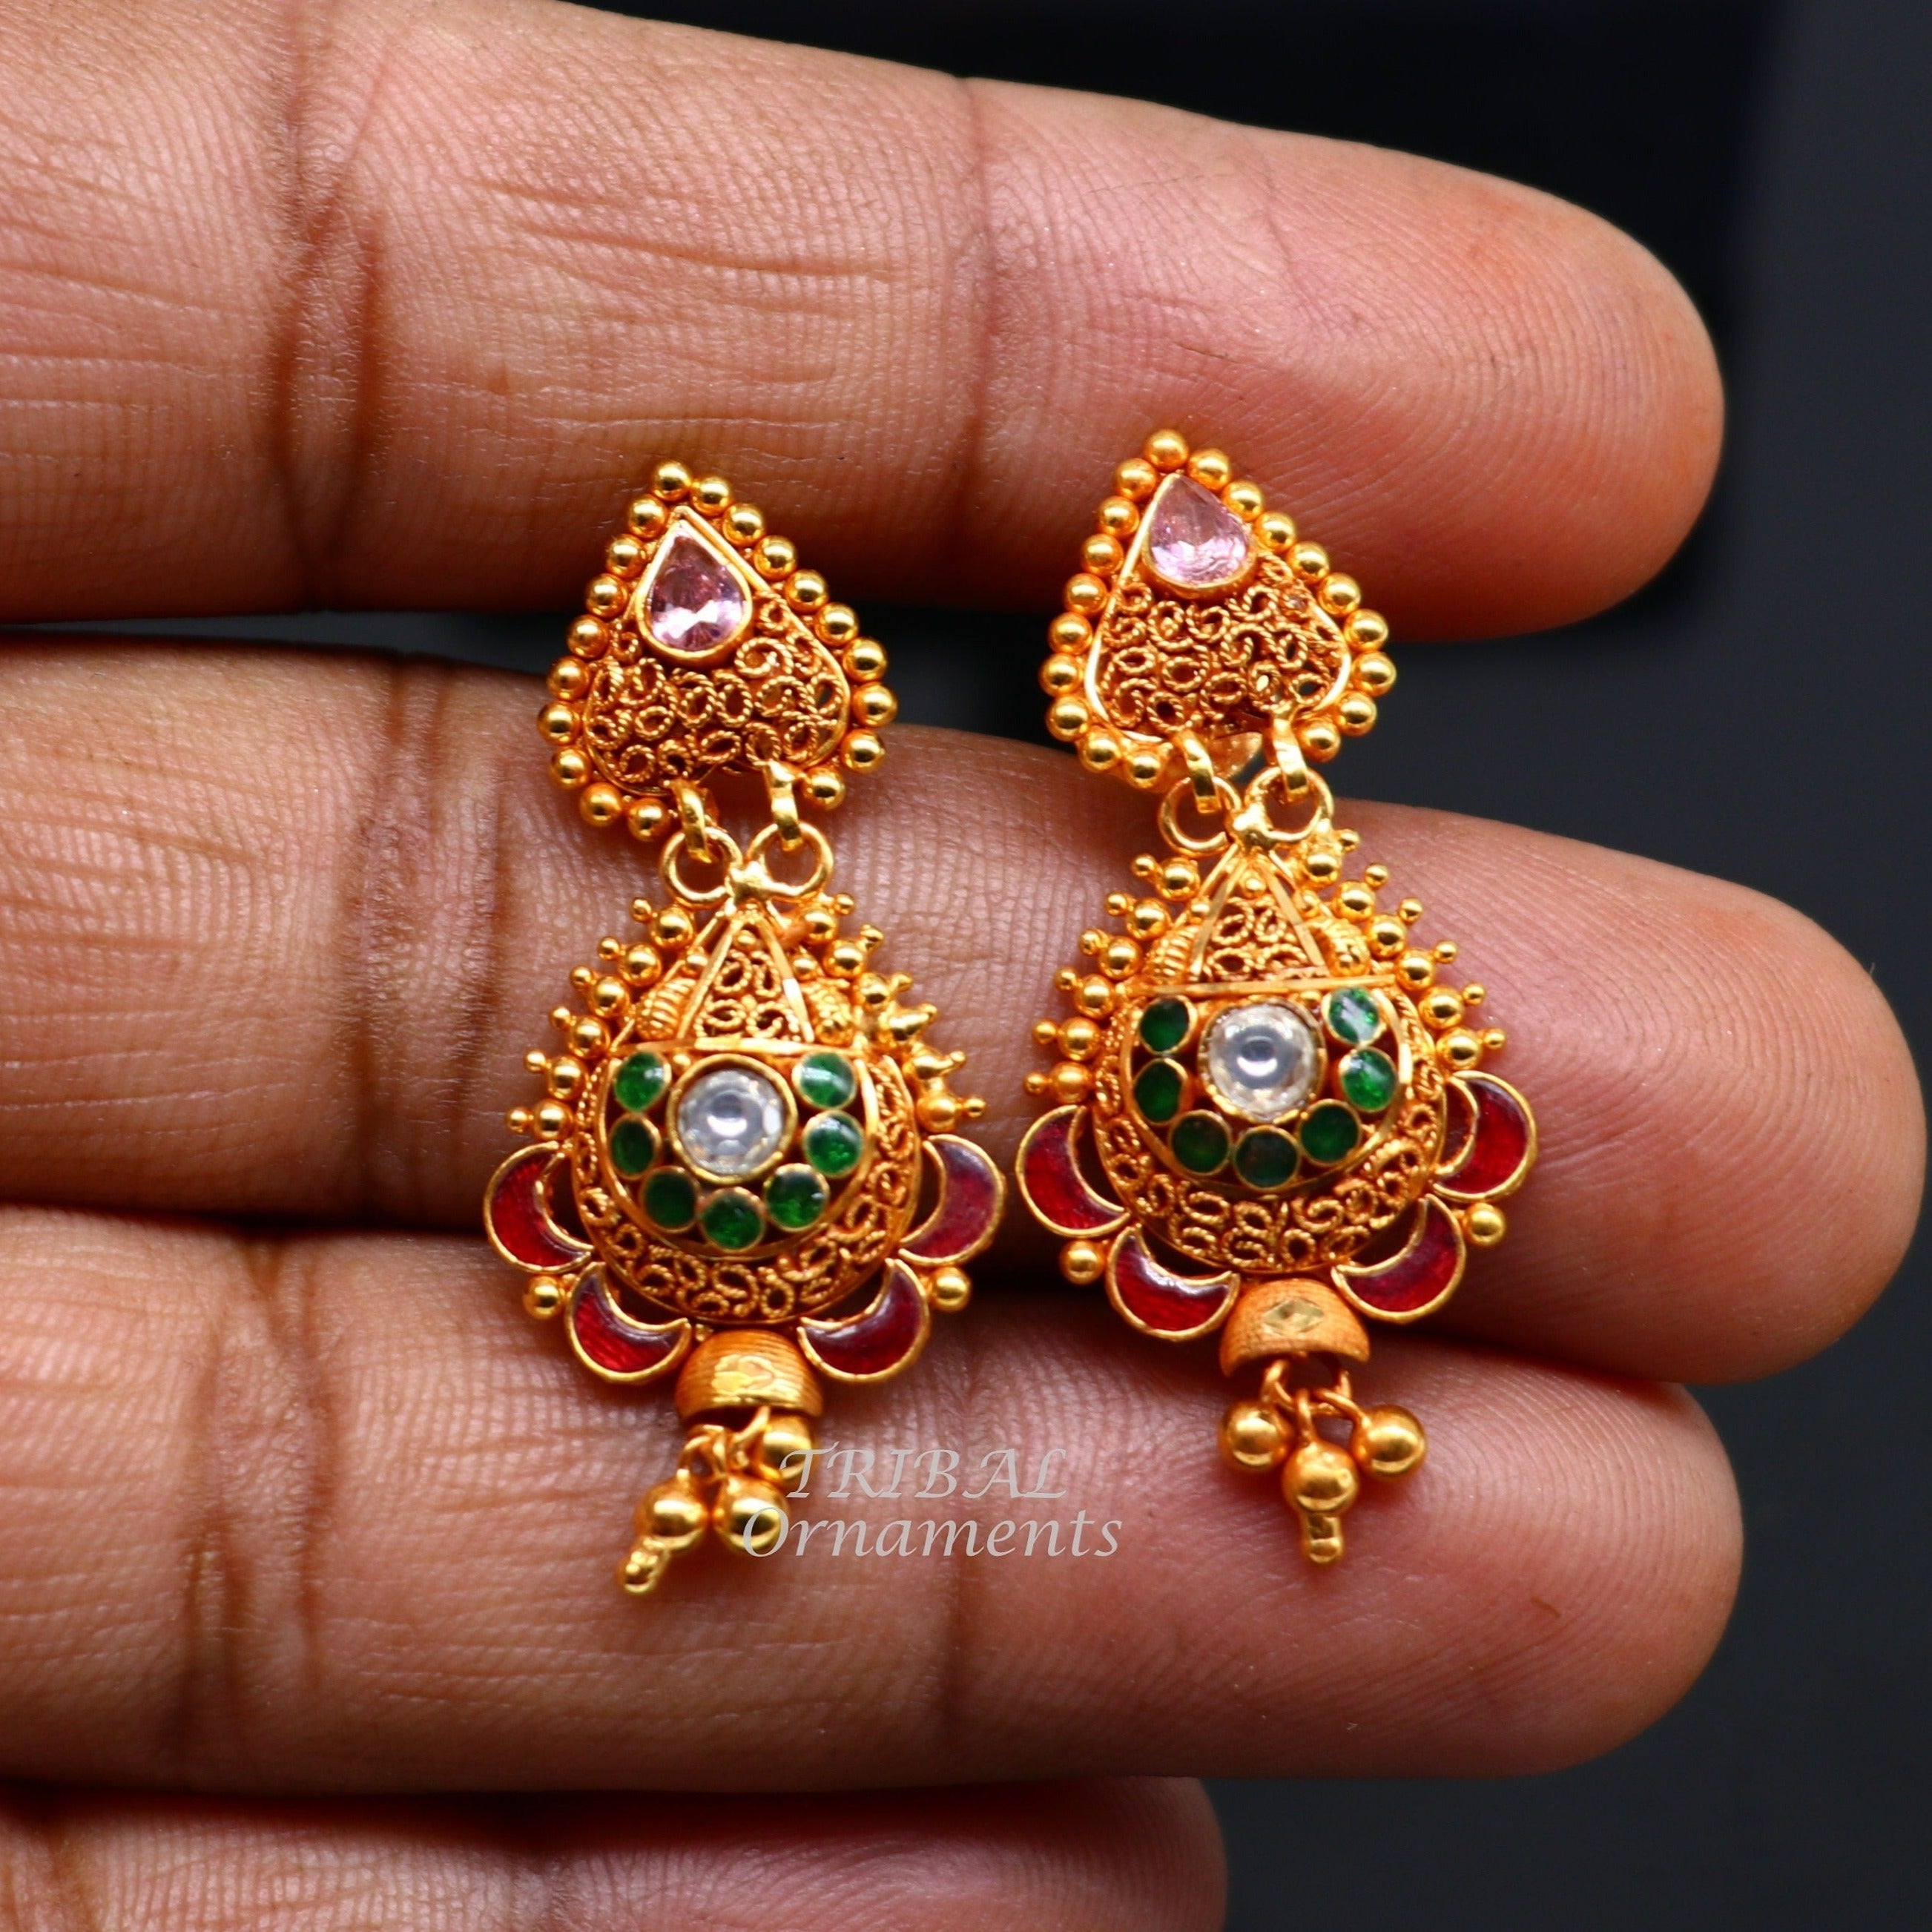 Gold Earring Designs For Daily Wear And Party Wear With Weight And Price   Apsara Fa  Gold earrings with price Gold bridal jewellery sets Gold  earrings designs